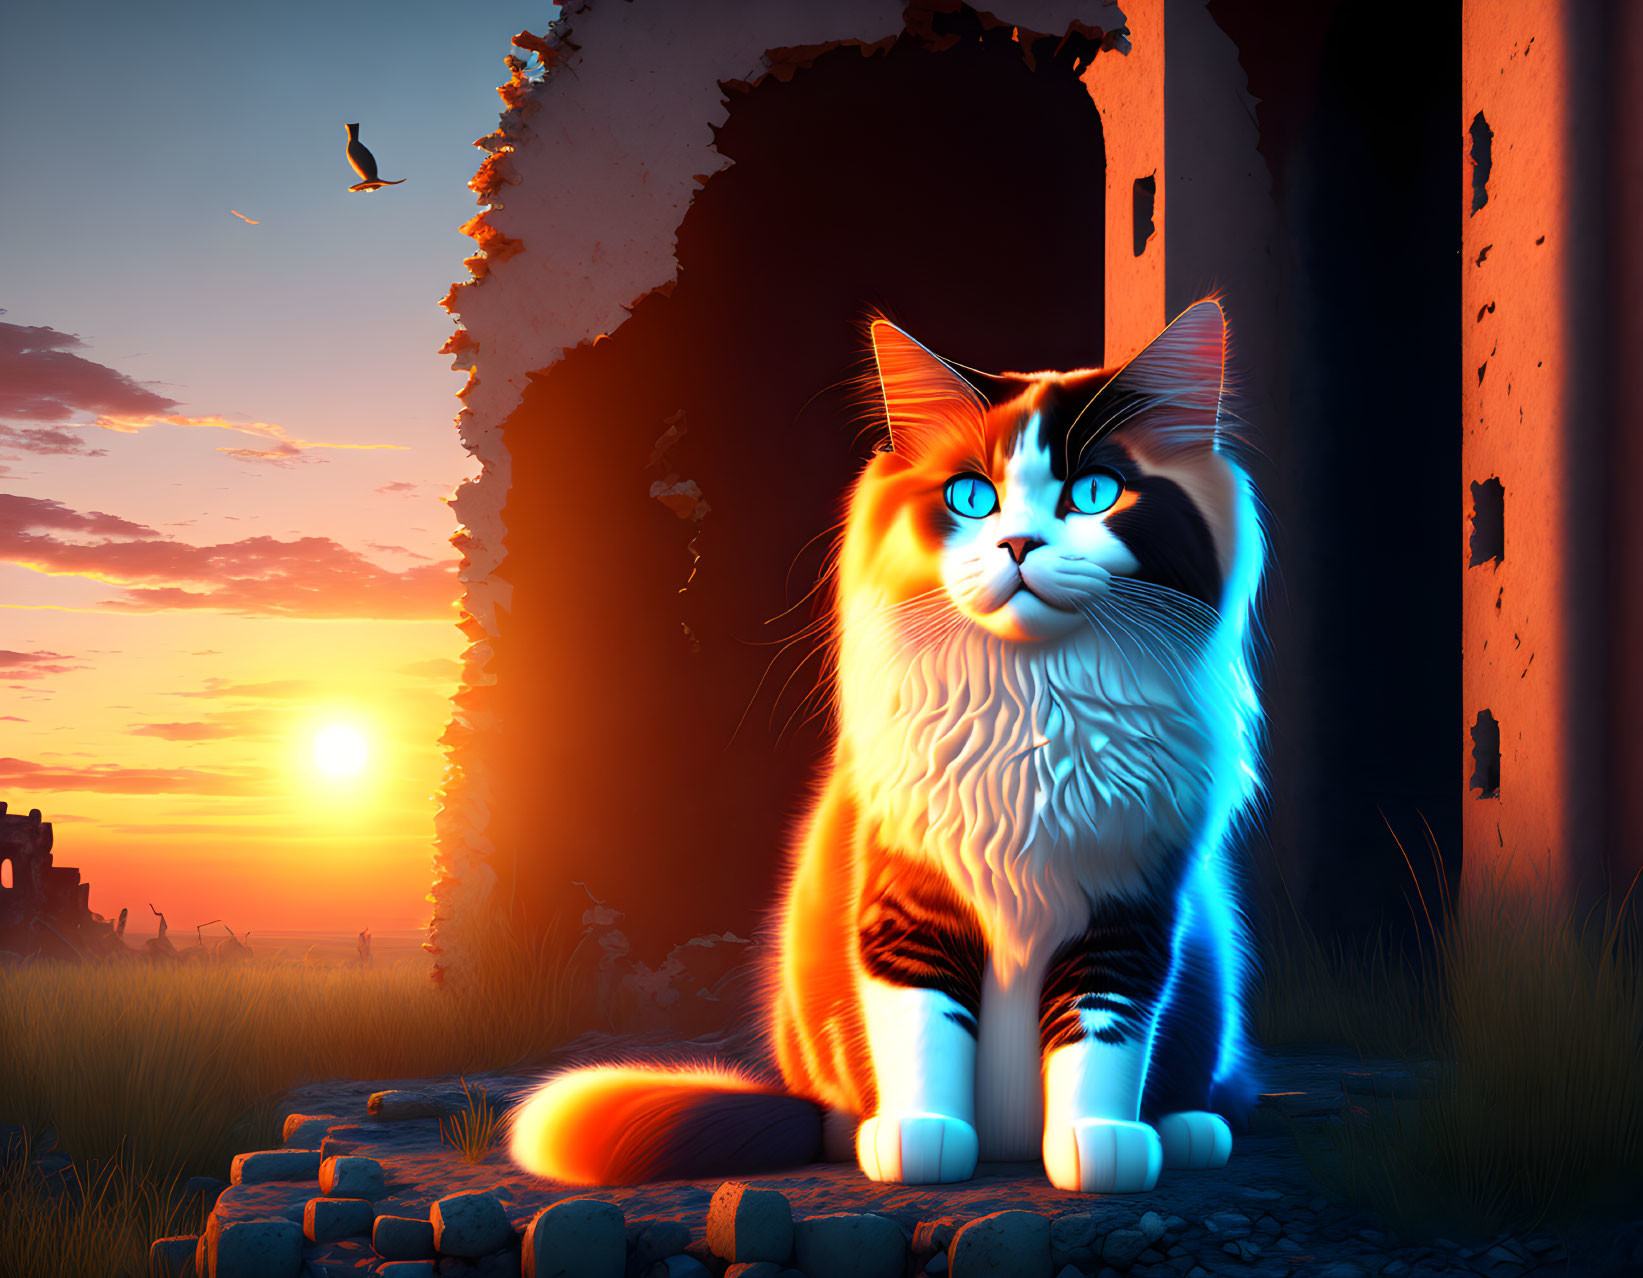 Majestic cat with blue eyes in sunlit ruined doorway at sunset